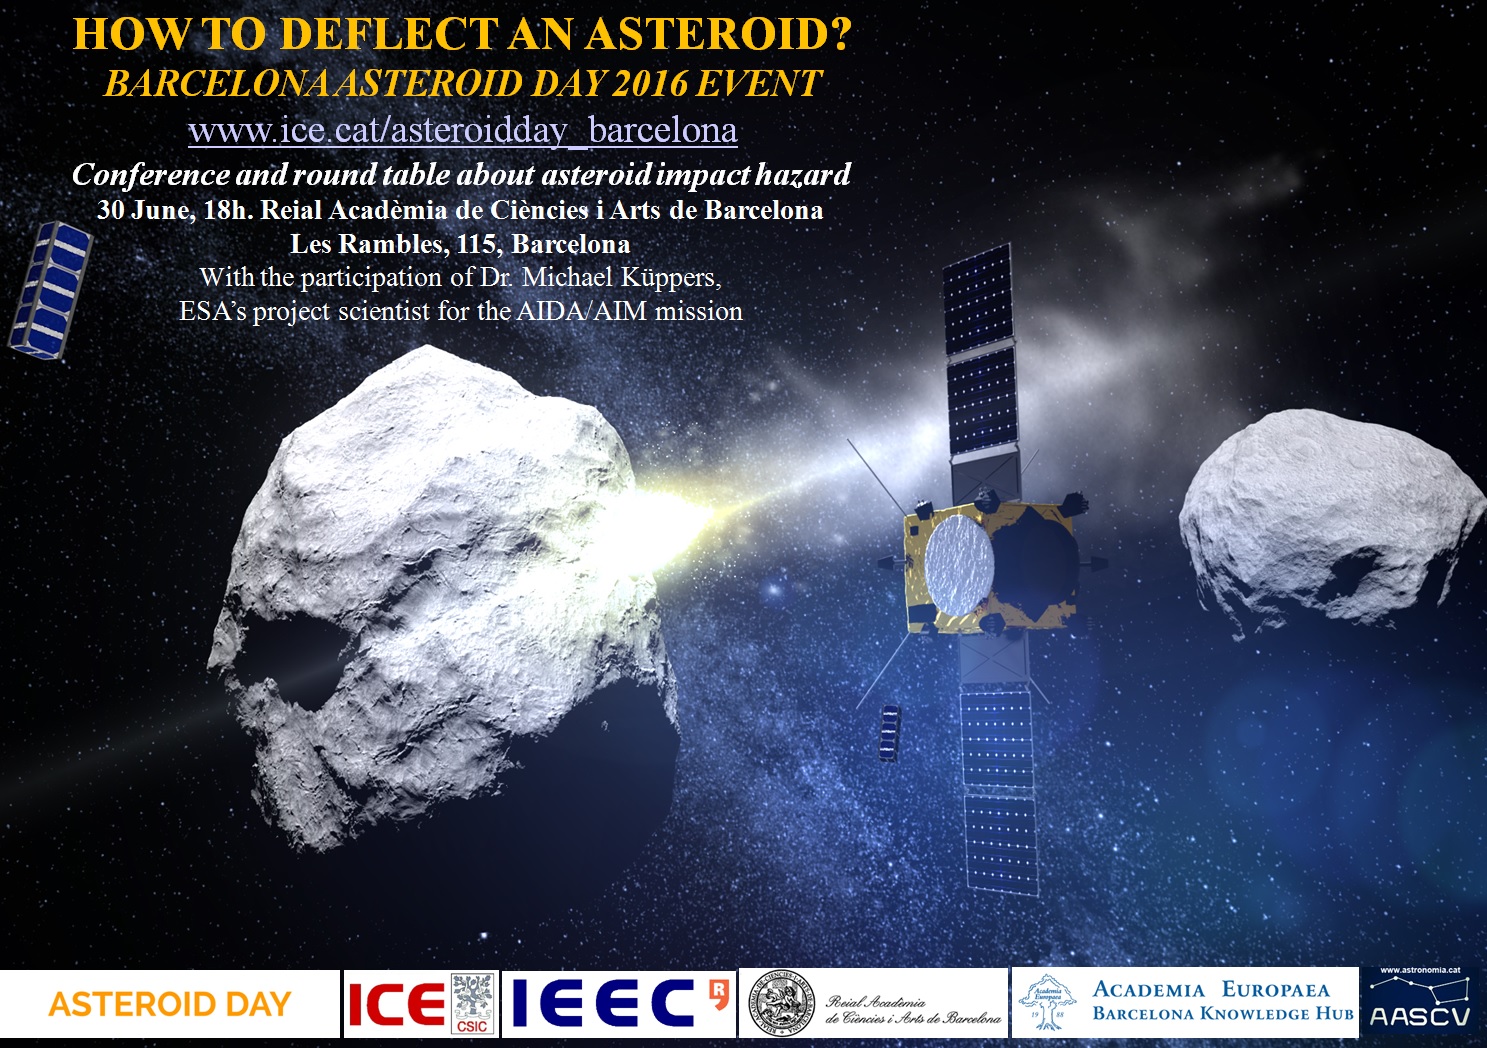 Are we able to divert potentially hazardous asteroids?